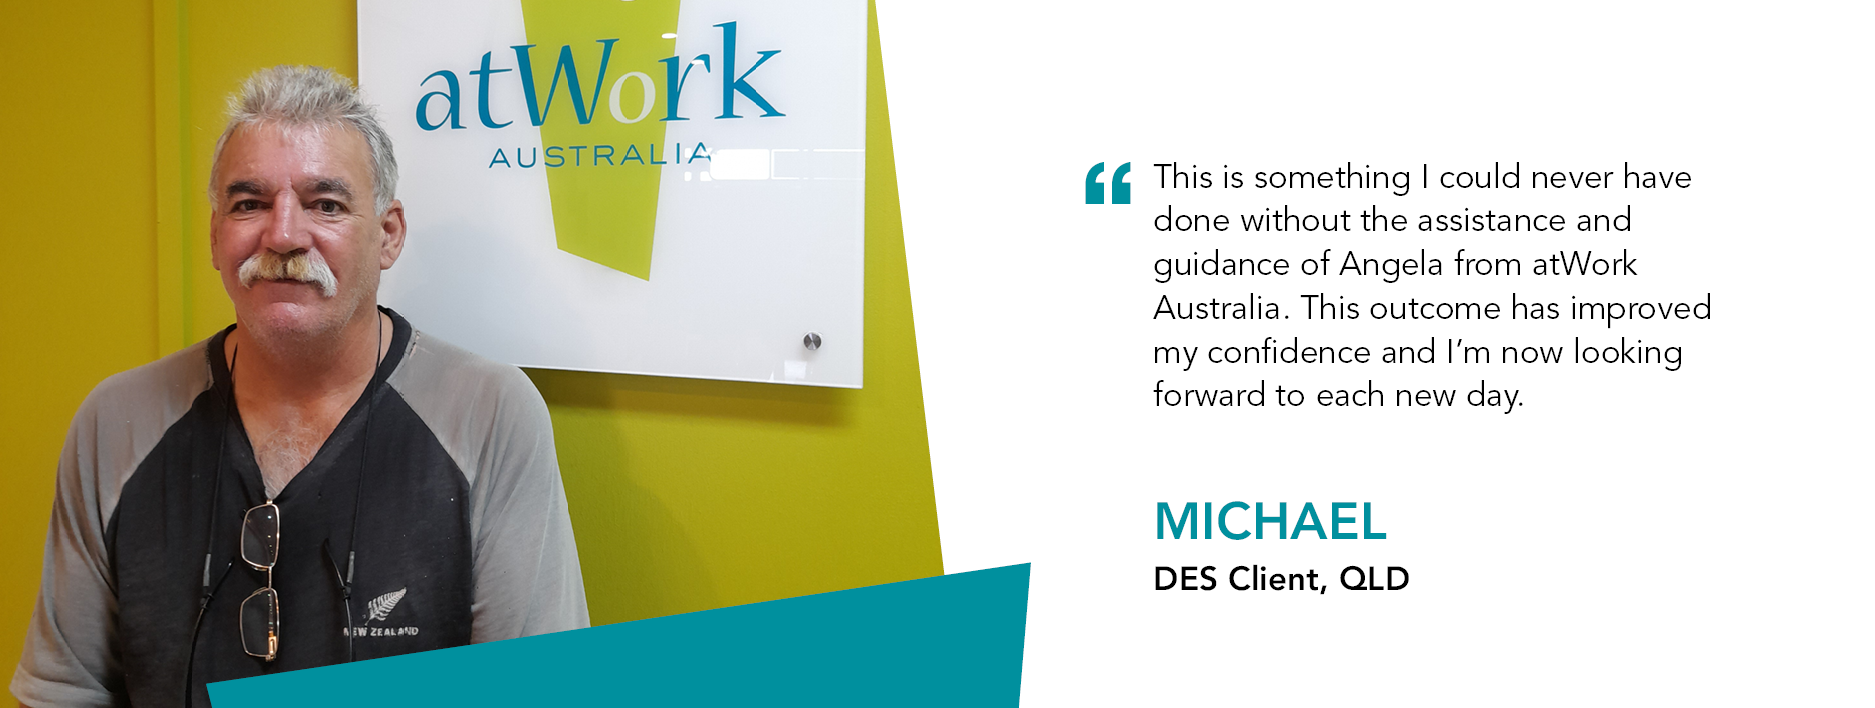 Michael grins under his bushy moustache. Quote reads "This is something I could never have done without the assistance and guidance of Angela from atWork Australia. This outcome has improved my confidence and I'm now looking forward to each new day." Michael DES Client QLD